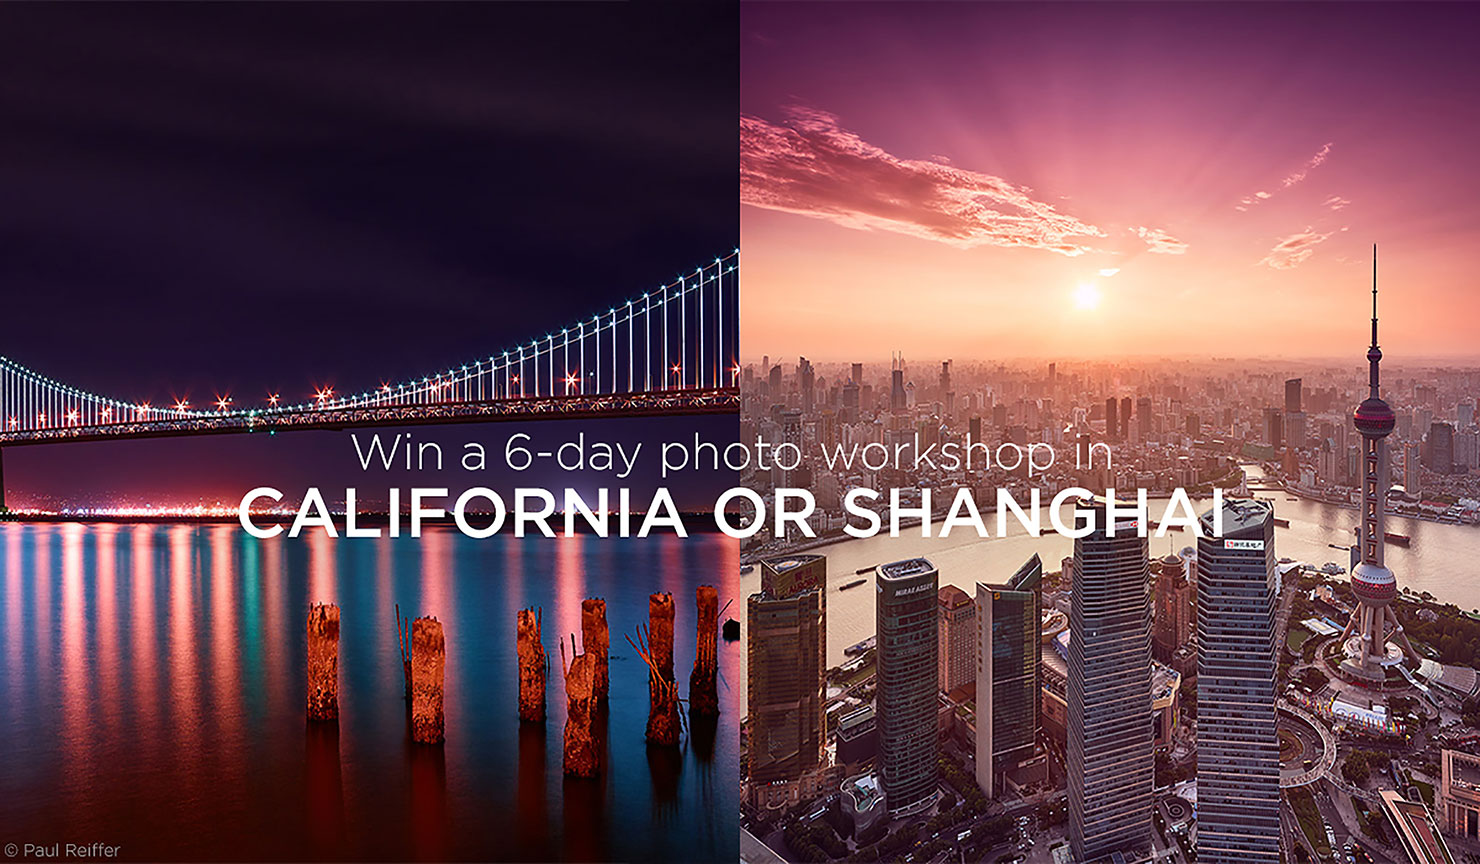 phase one capture dedication photography competition april 2018 paul reiffer california shanghai workshop